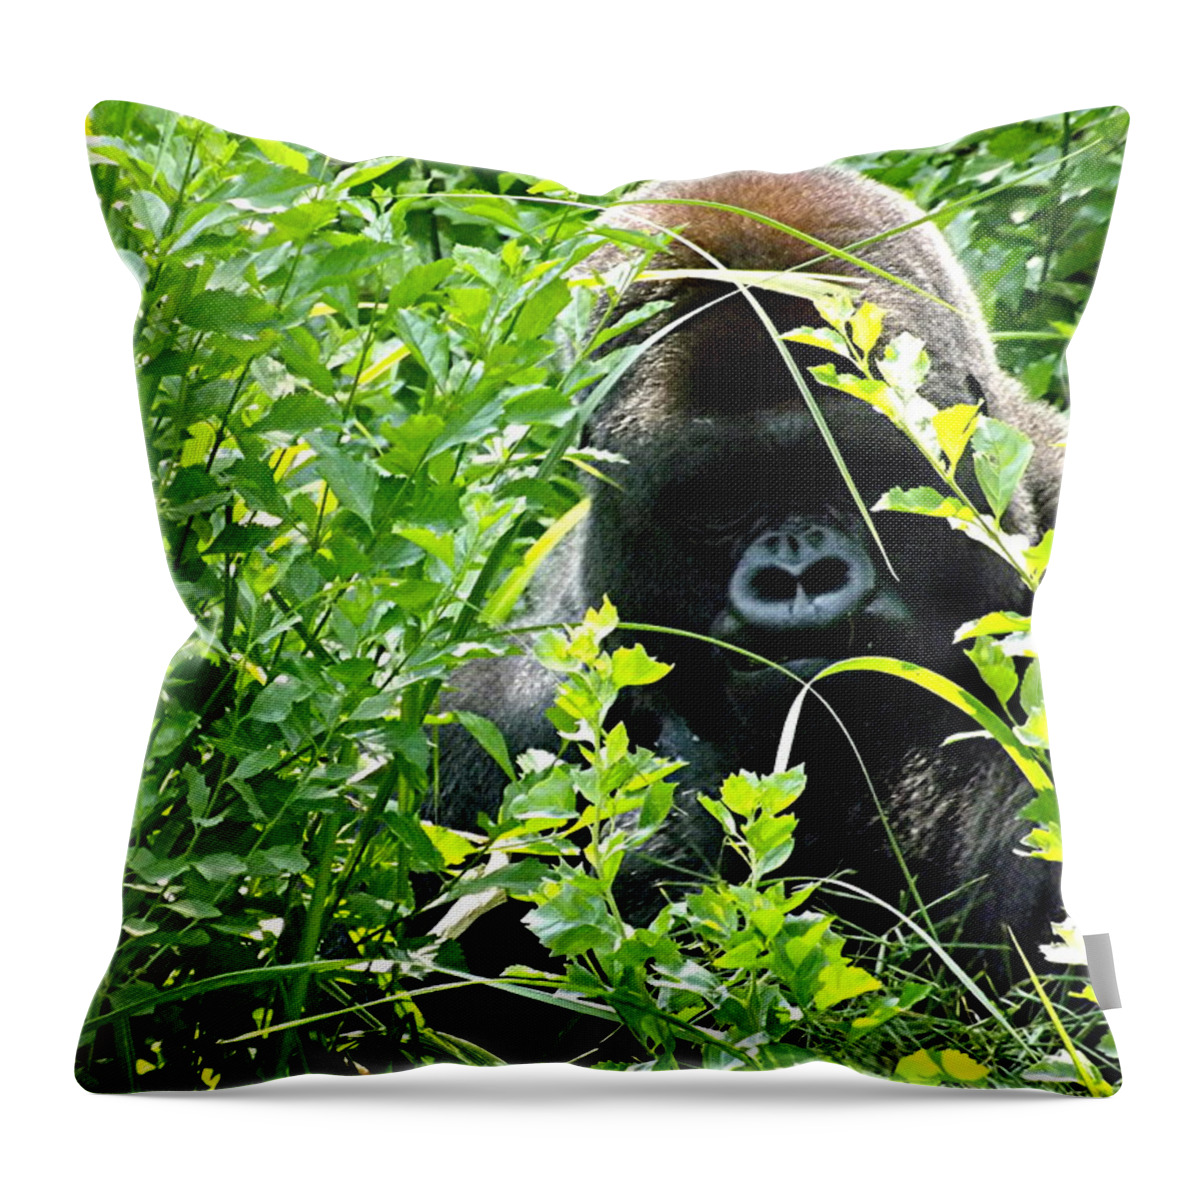 Disney Throw Pillow featuring the digital art Can I Help You? by Barkley Simpson